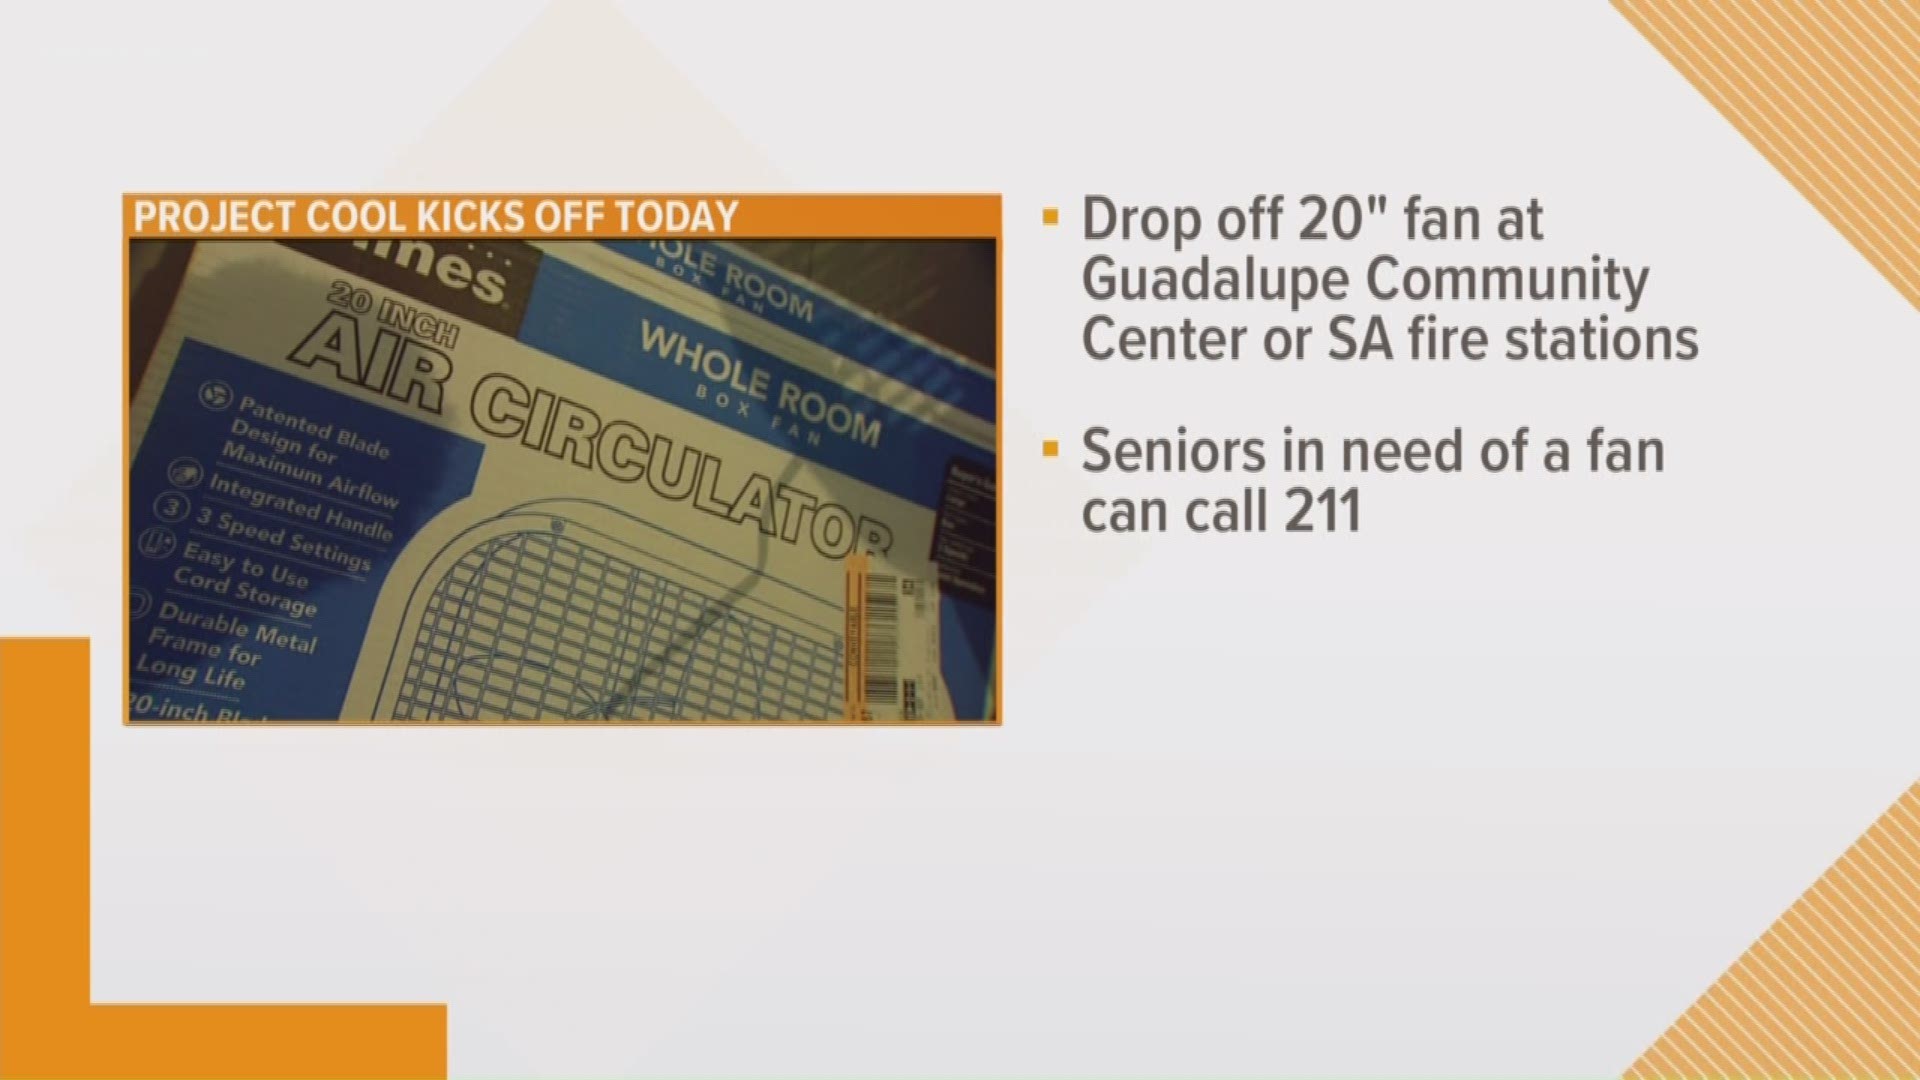 The goal is to provide more than 5,000 fans to seniors who may not have air conditioning or can't pay for higher utility bills during the summer. If you would like to help, you can drop off a new 20 inch box fan at the Guadalupe Community Center on West Cesar Chavez during the week, or at any San Antonio fire station, except station 23. Anyone interested in receiving a fan can call 2-1-1.